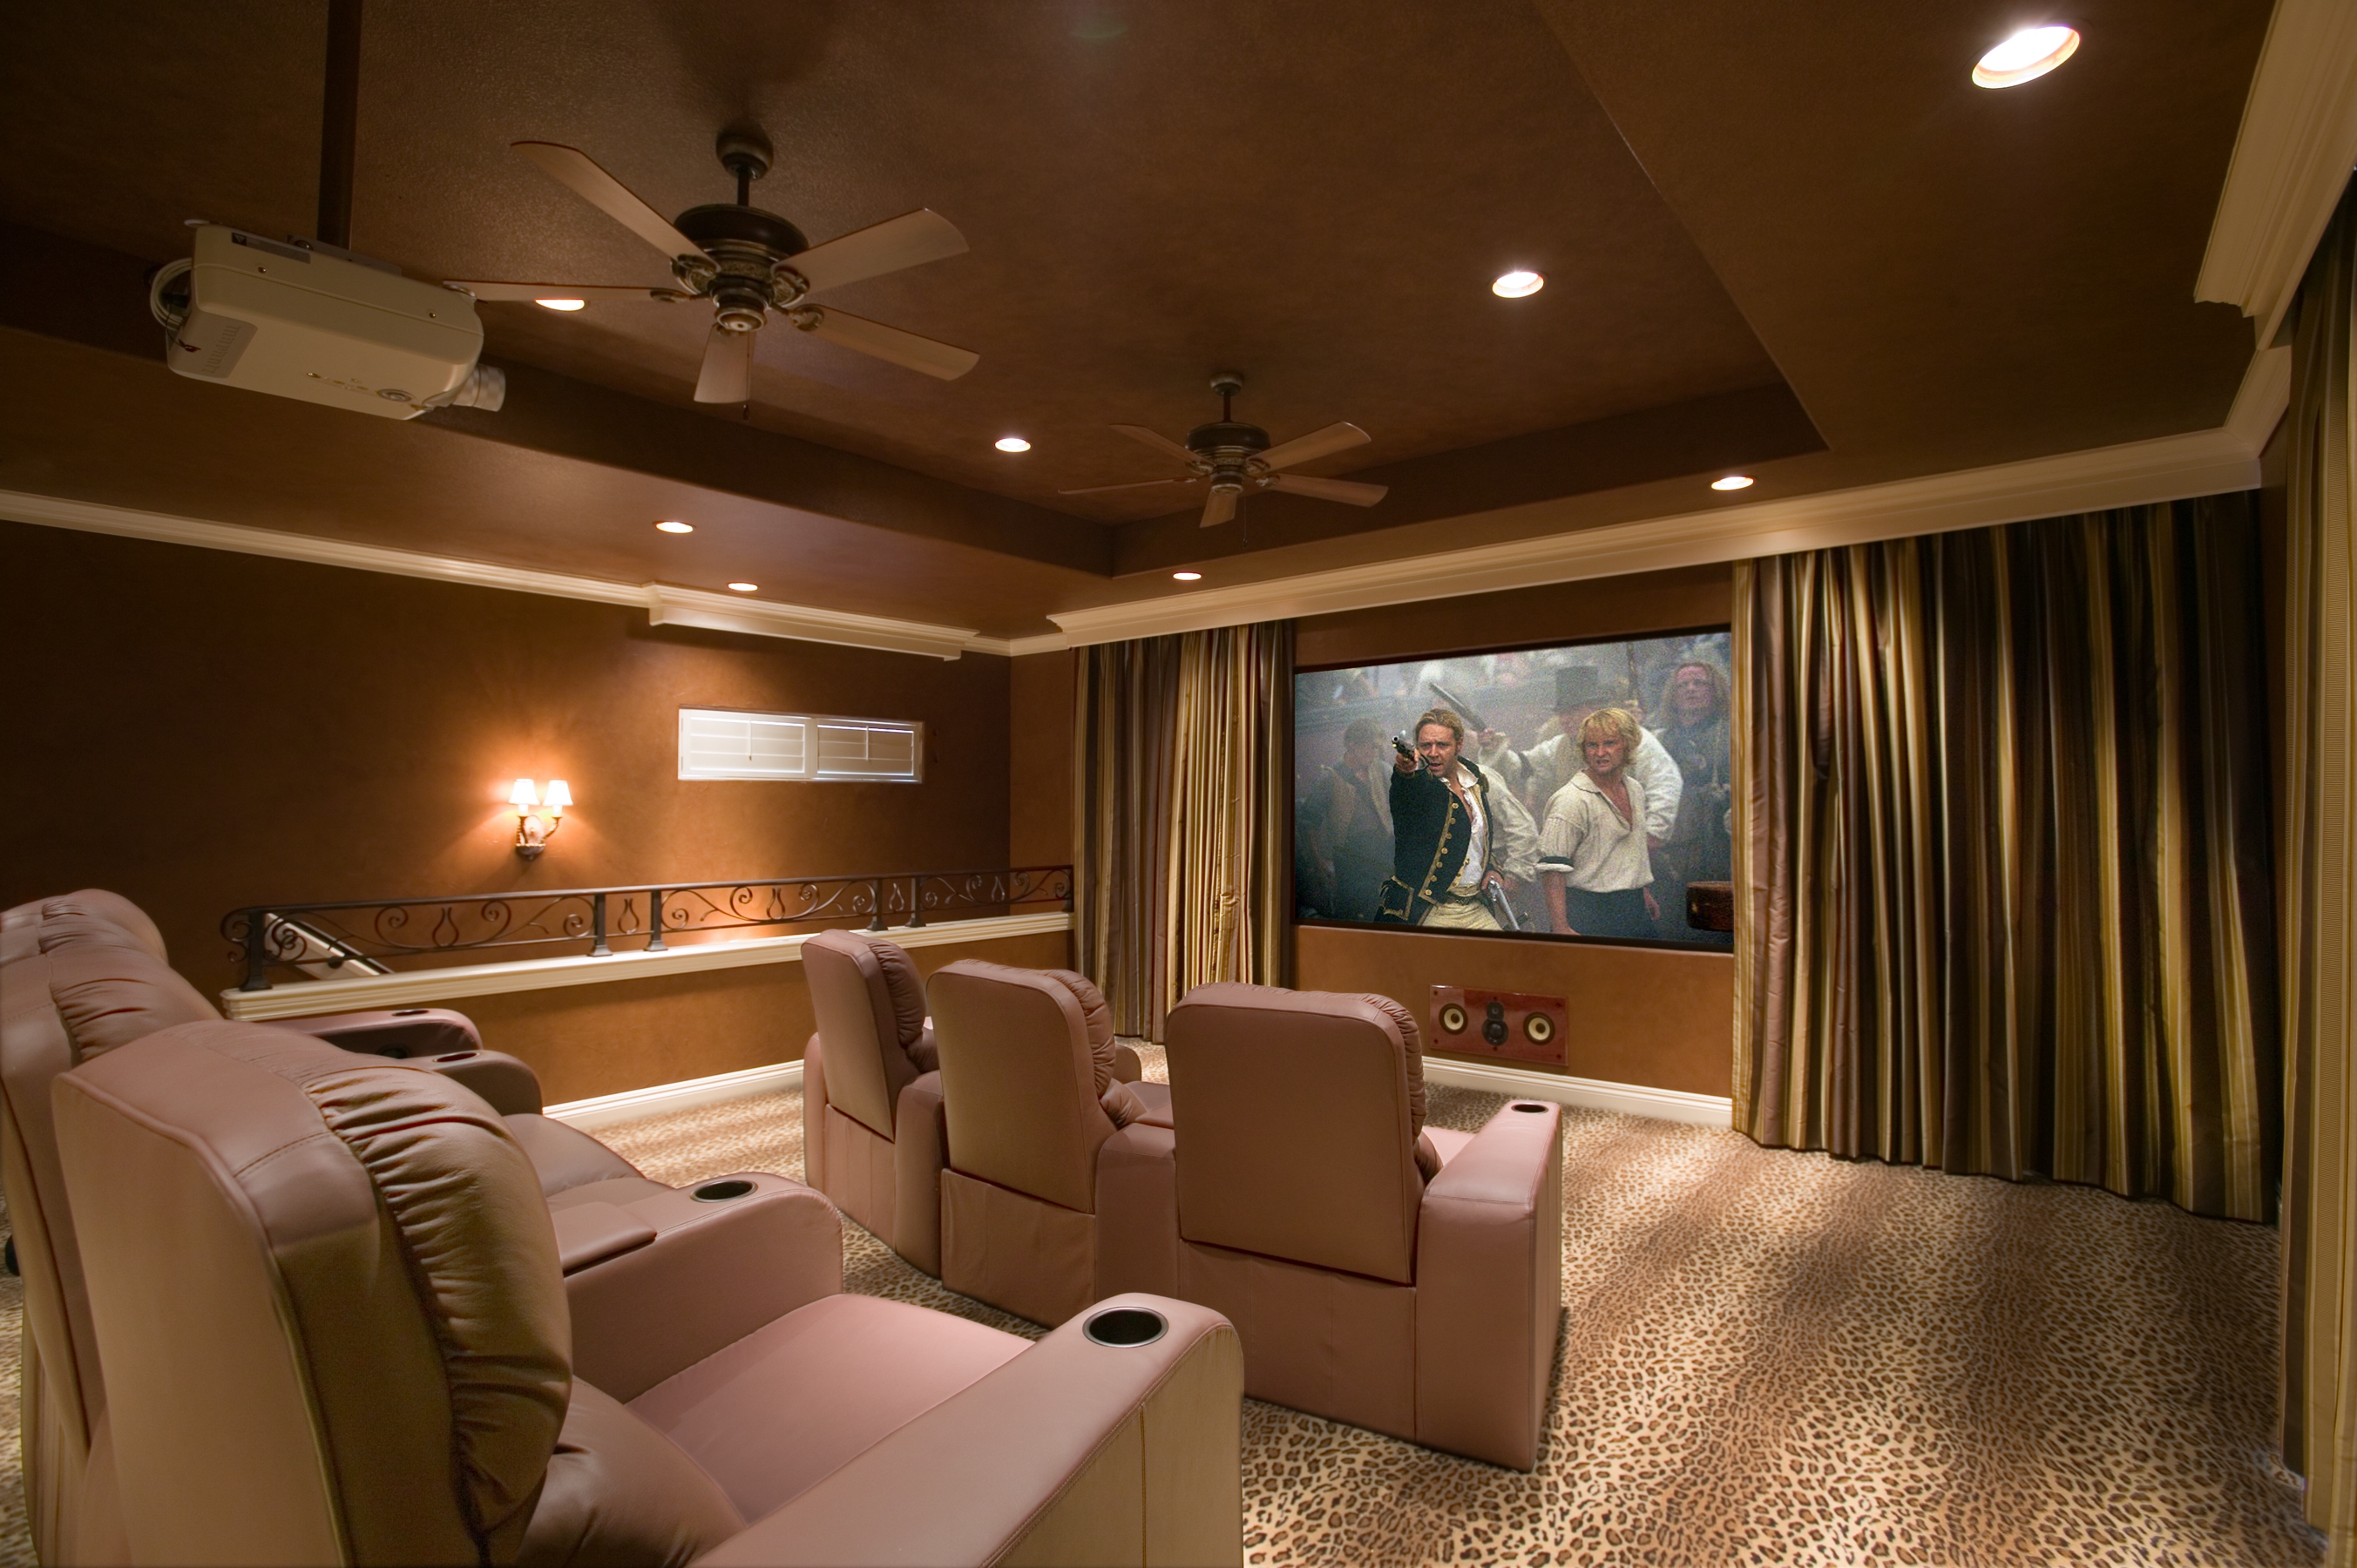 Home Theater Ceiling Tile Speakers